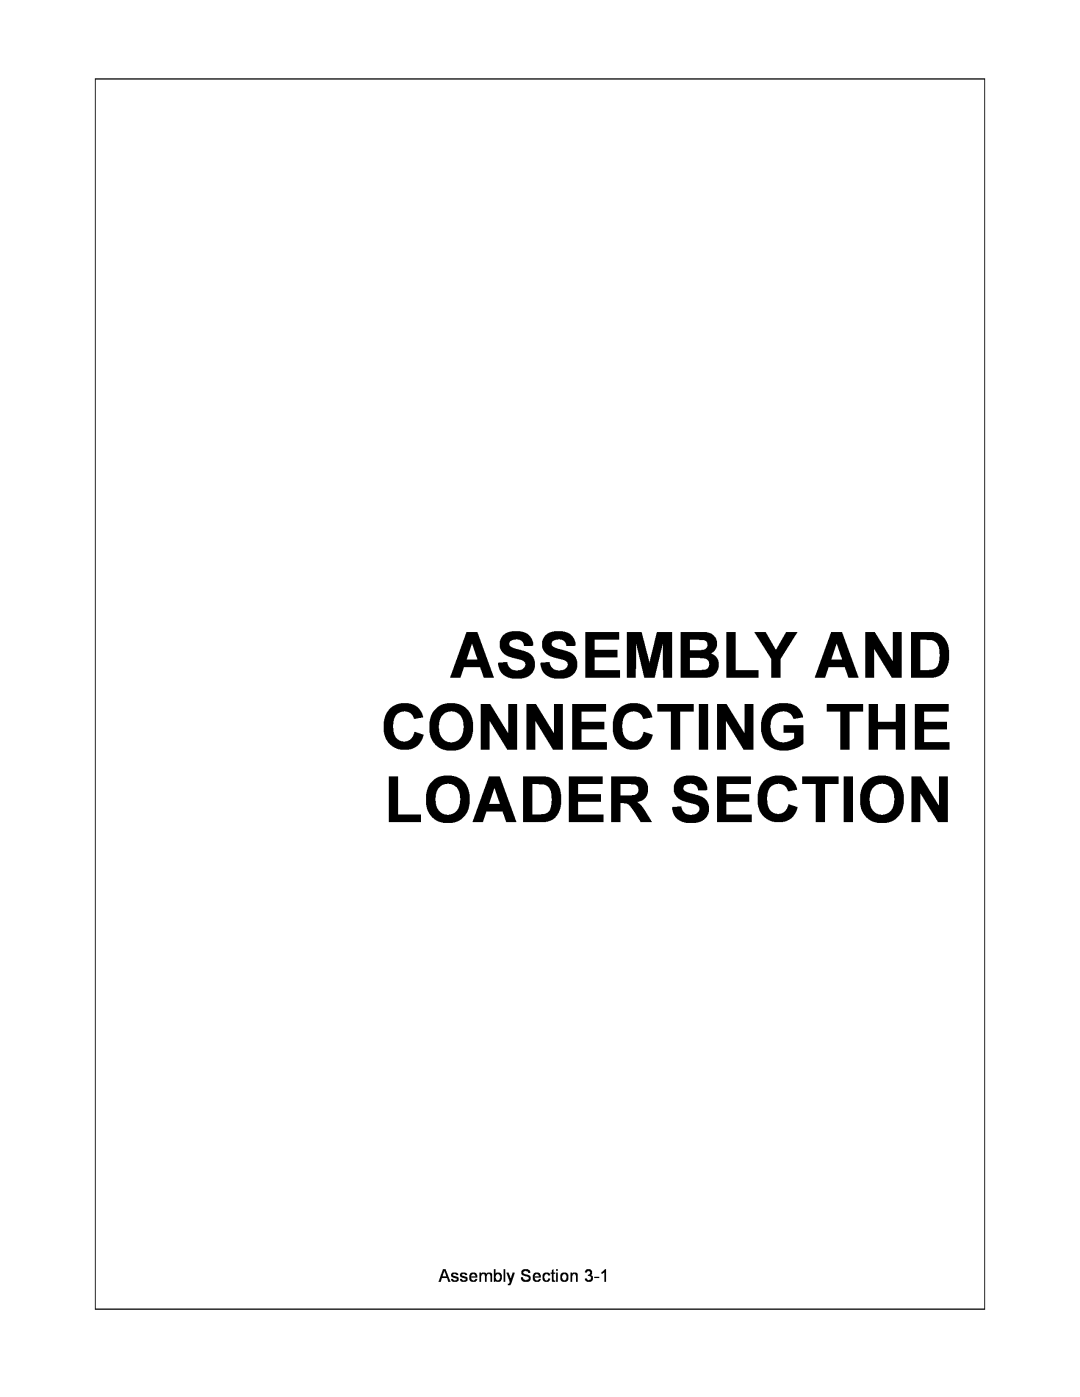 Alamo 3109 manual Assembly And Connecting The Loader Section, Assembly Section 